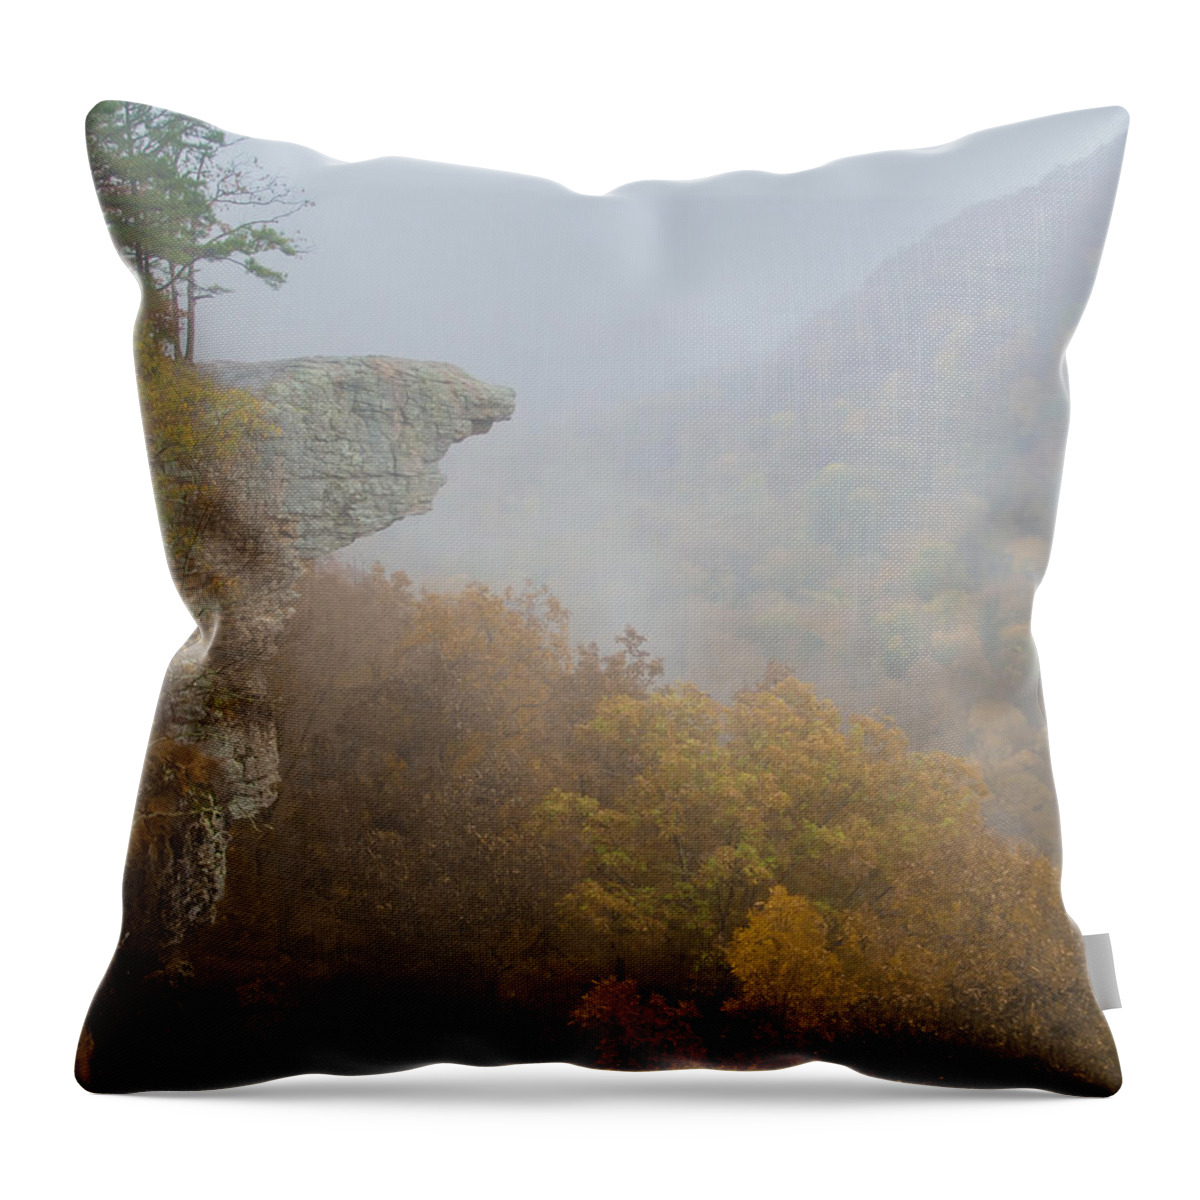  Throw Pillow featuring the photograph Whitaker Point Arkansas by Steve Marler